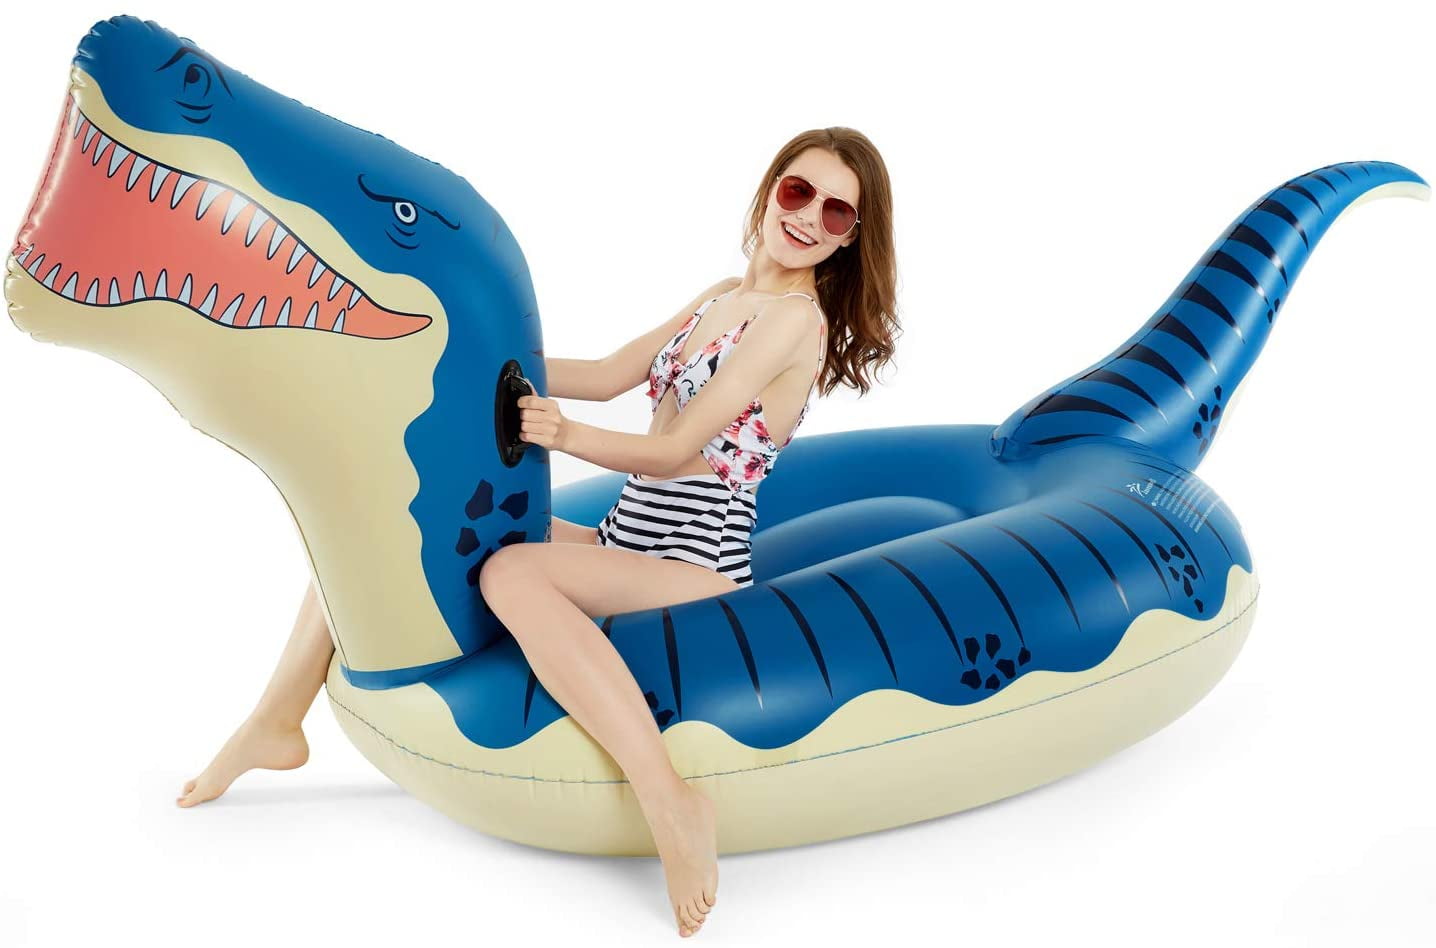 Intex Wave Rider Ride-on Pool Float Toy Inflatable Beach Summer Fun for Ages 3 for sale online 